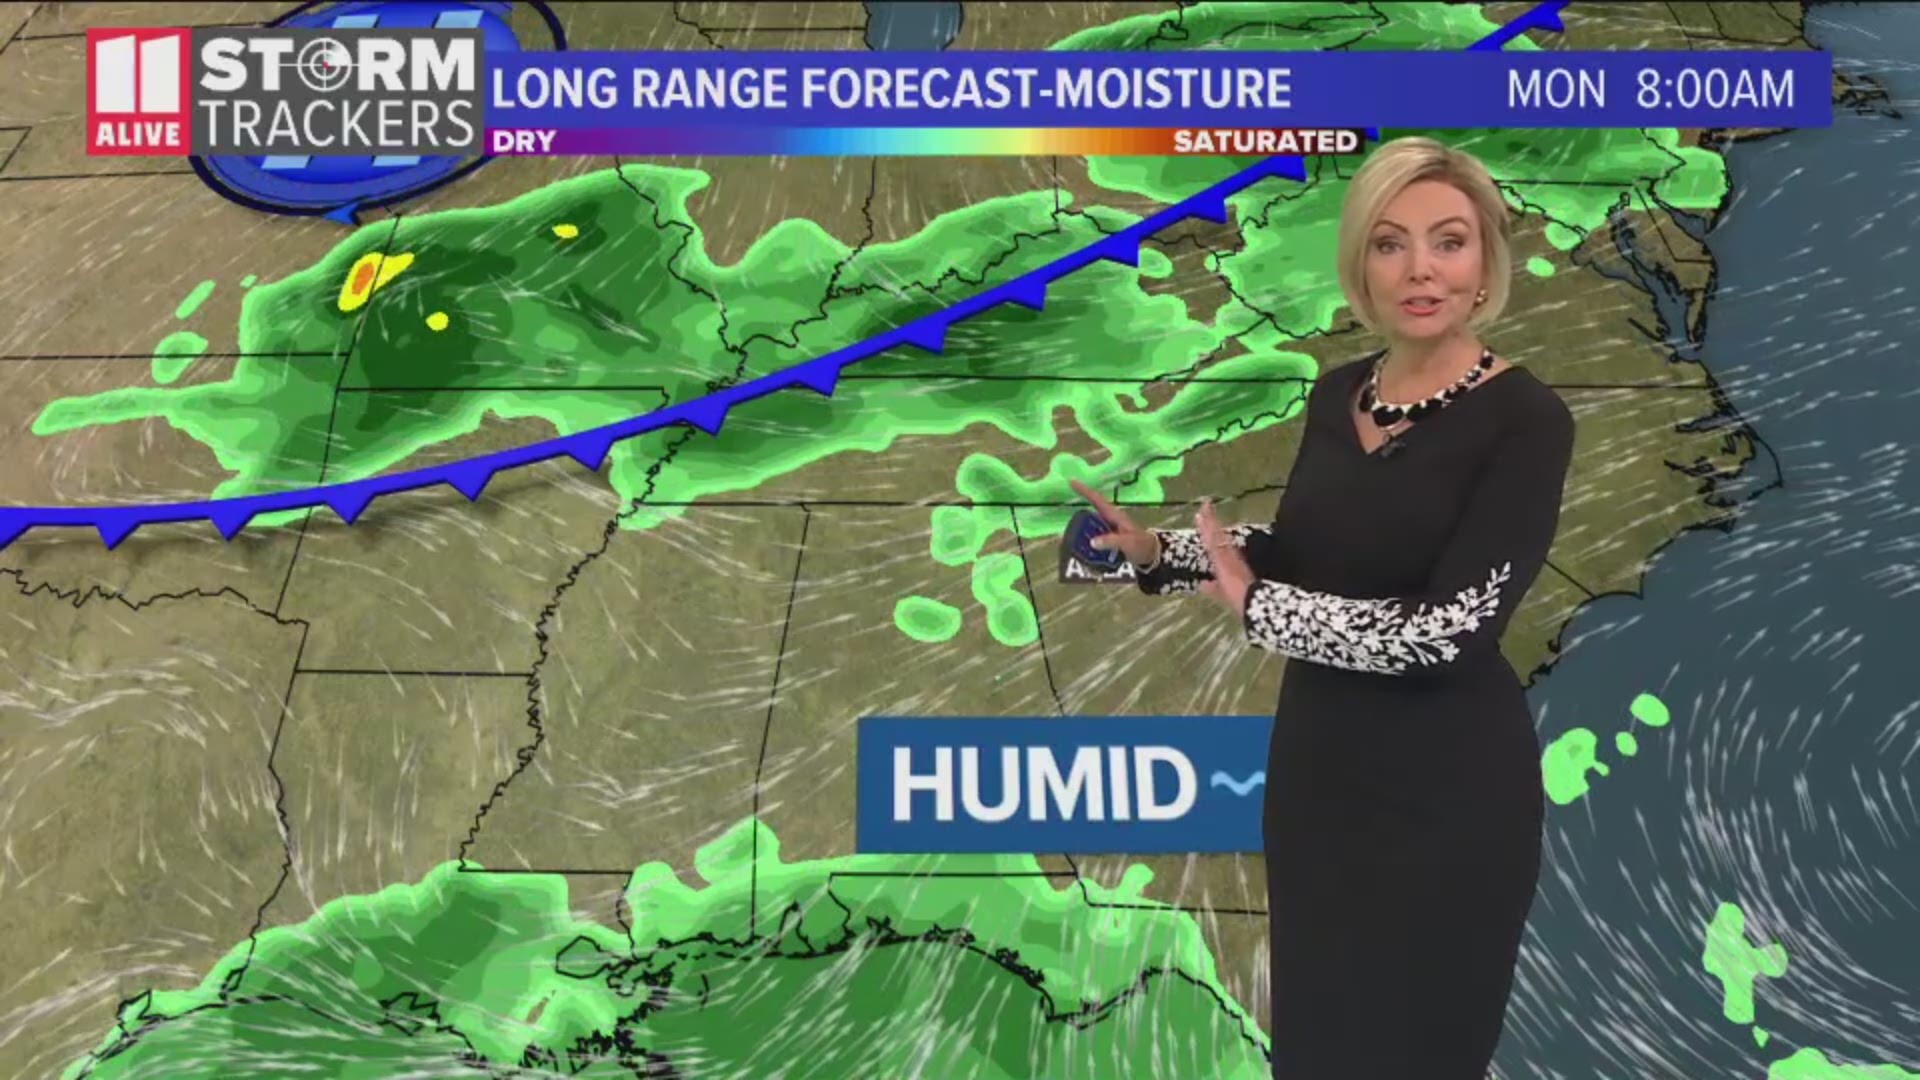 11Alive StormTracker and meteorologist Samantha Mohr has the forecast for Sunday, July 21, 2019.